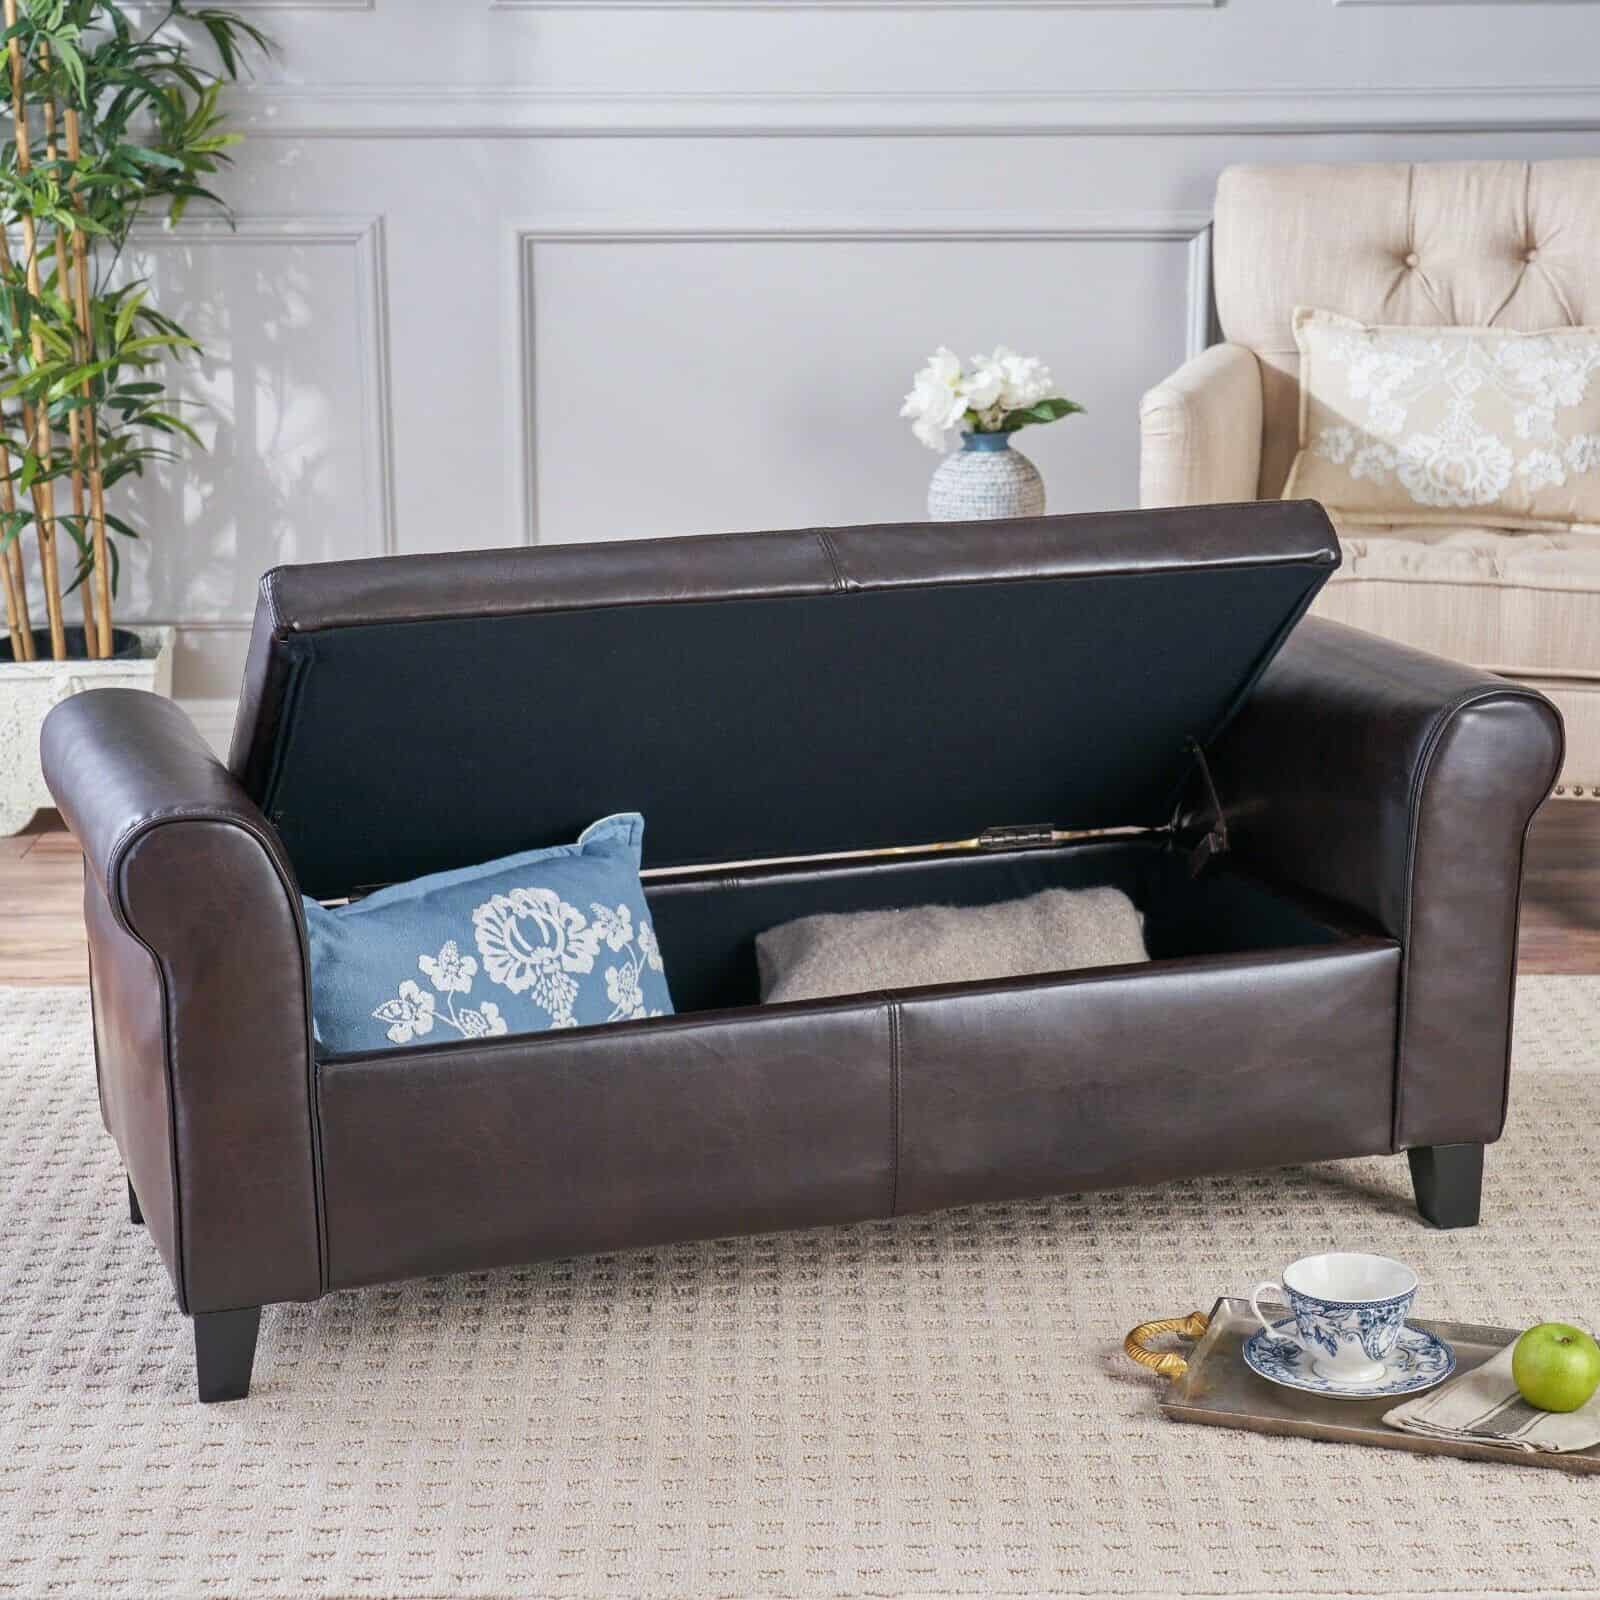 A brown leather storage bench in a living room.